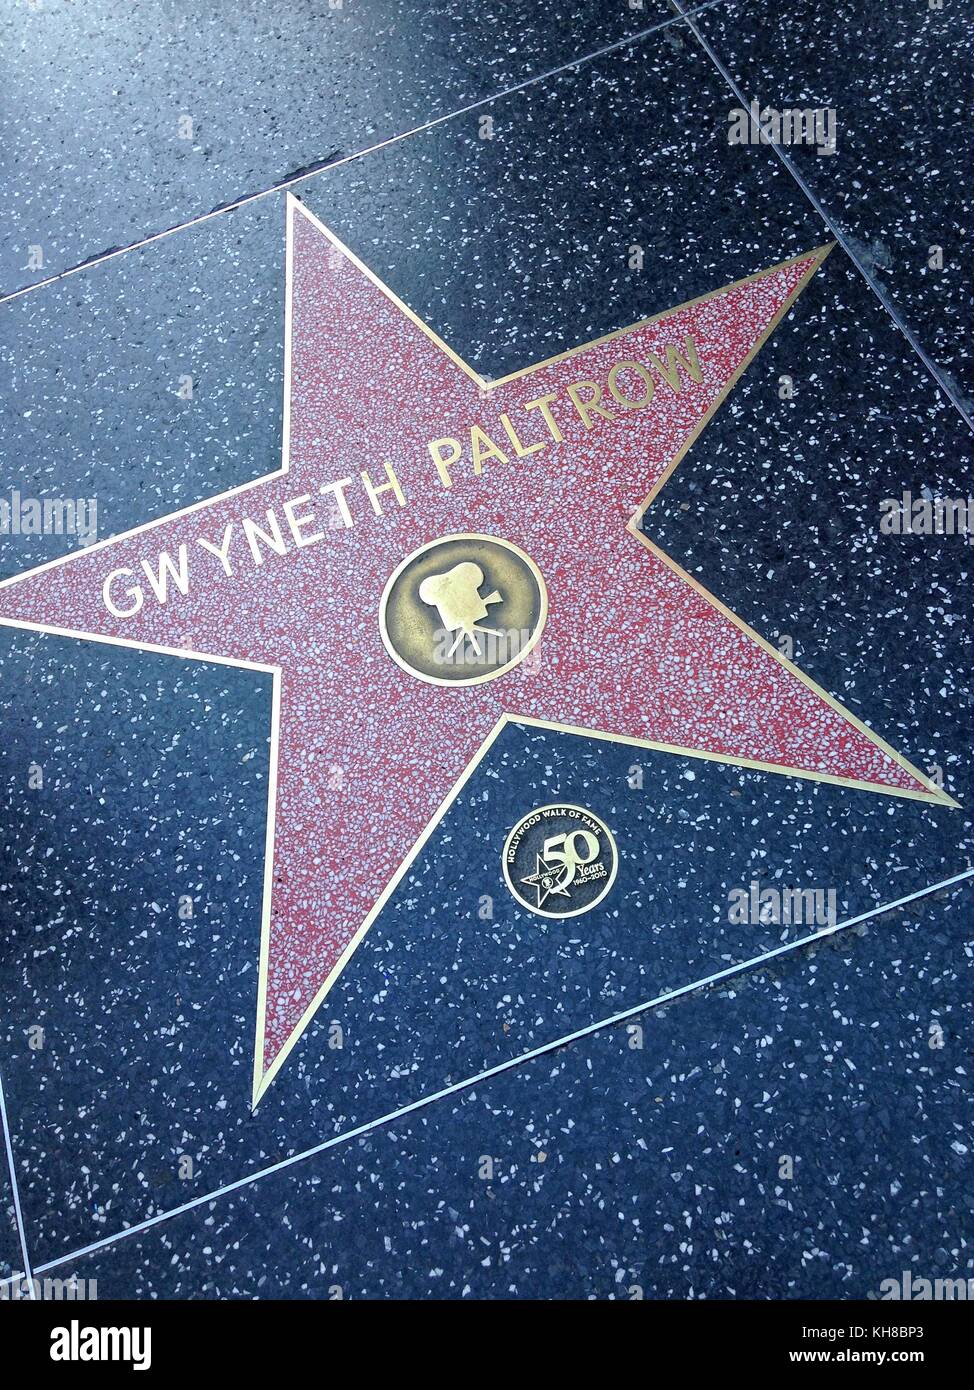 Hollywood, California - July 26 2017: Gwyneth Paltrow Hollywood walk of fame star on July 26, 2017 in Hollywood, CA. American actress, singer, and foo Stock Photo